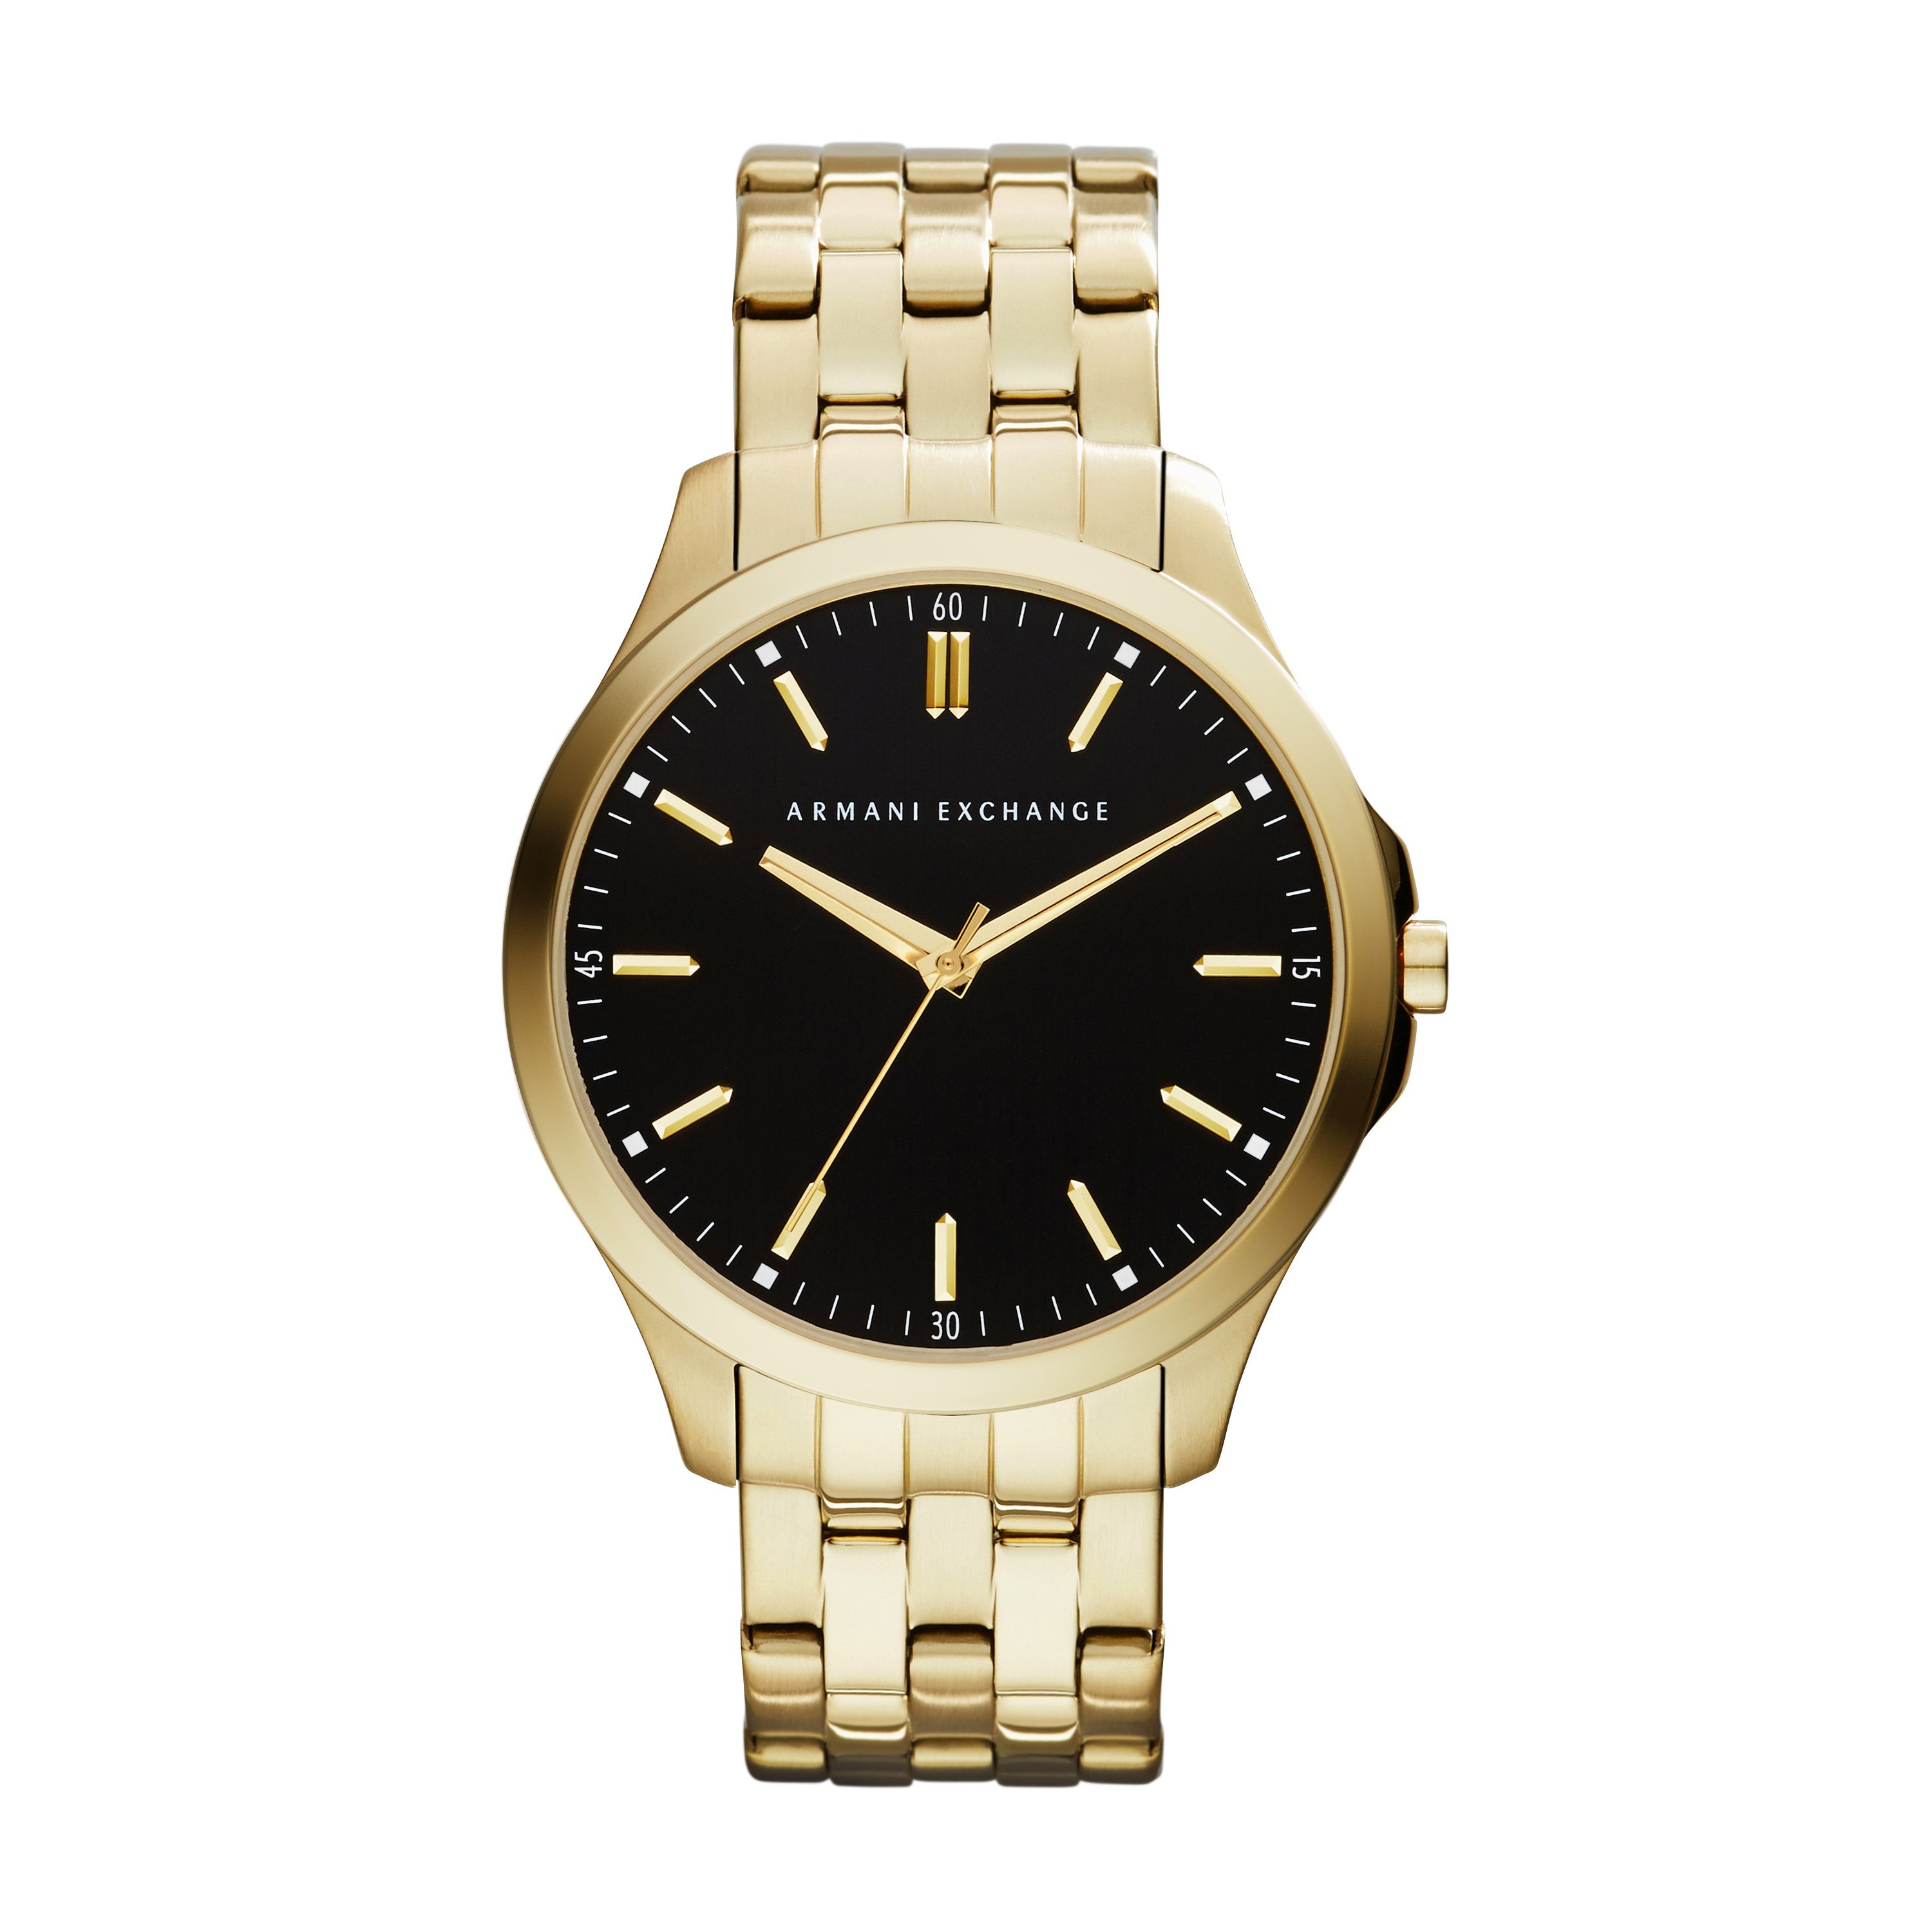 Mens Hampton Gold-Tone Stainless Steel Watch Black Dial